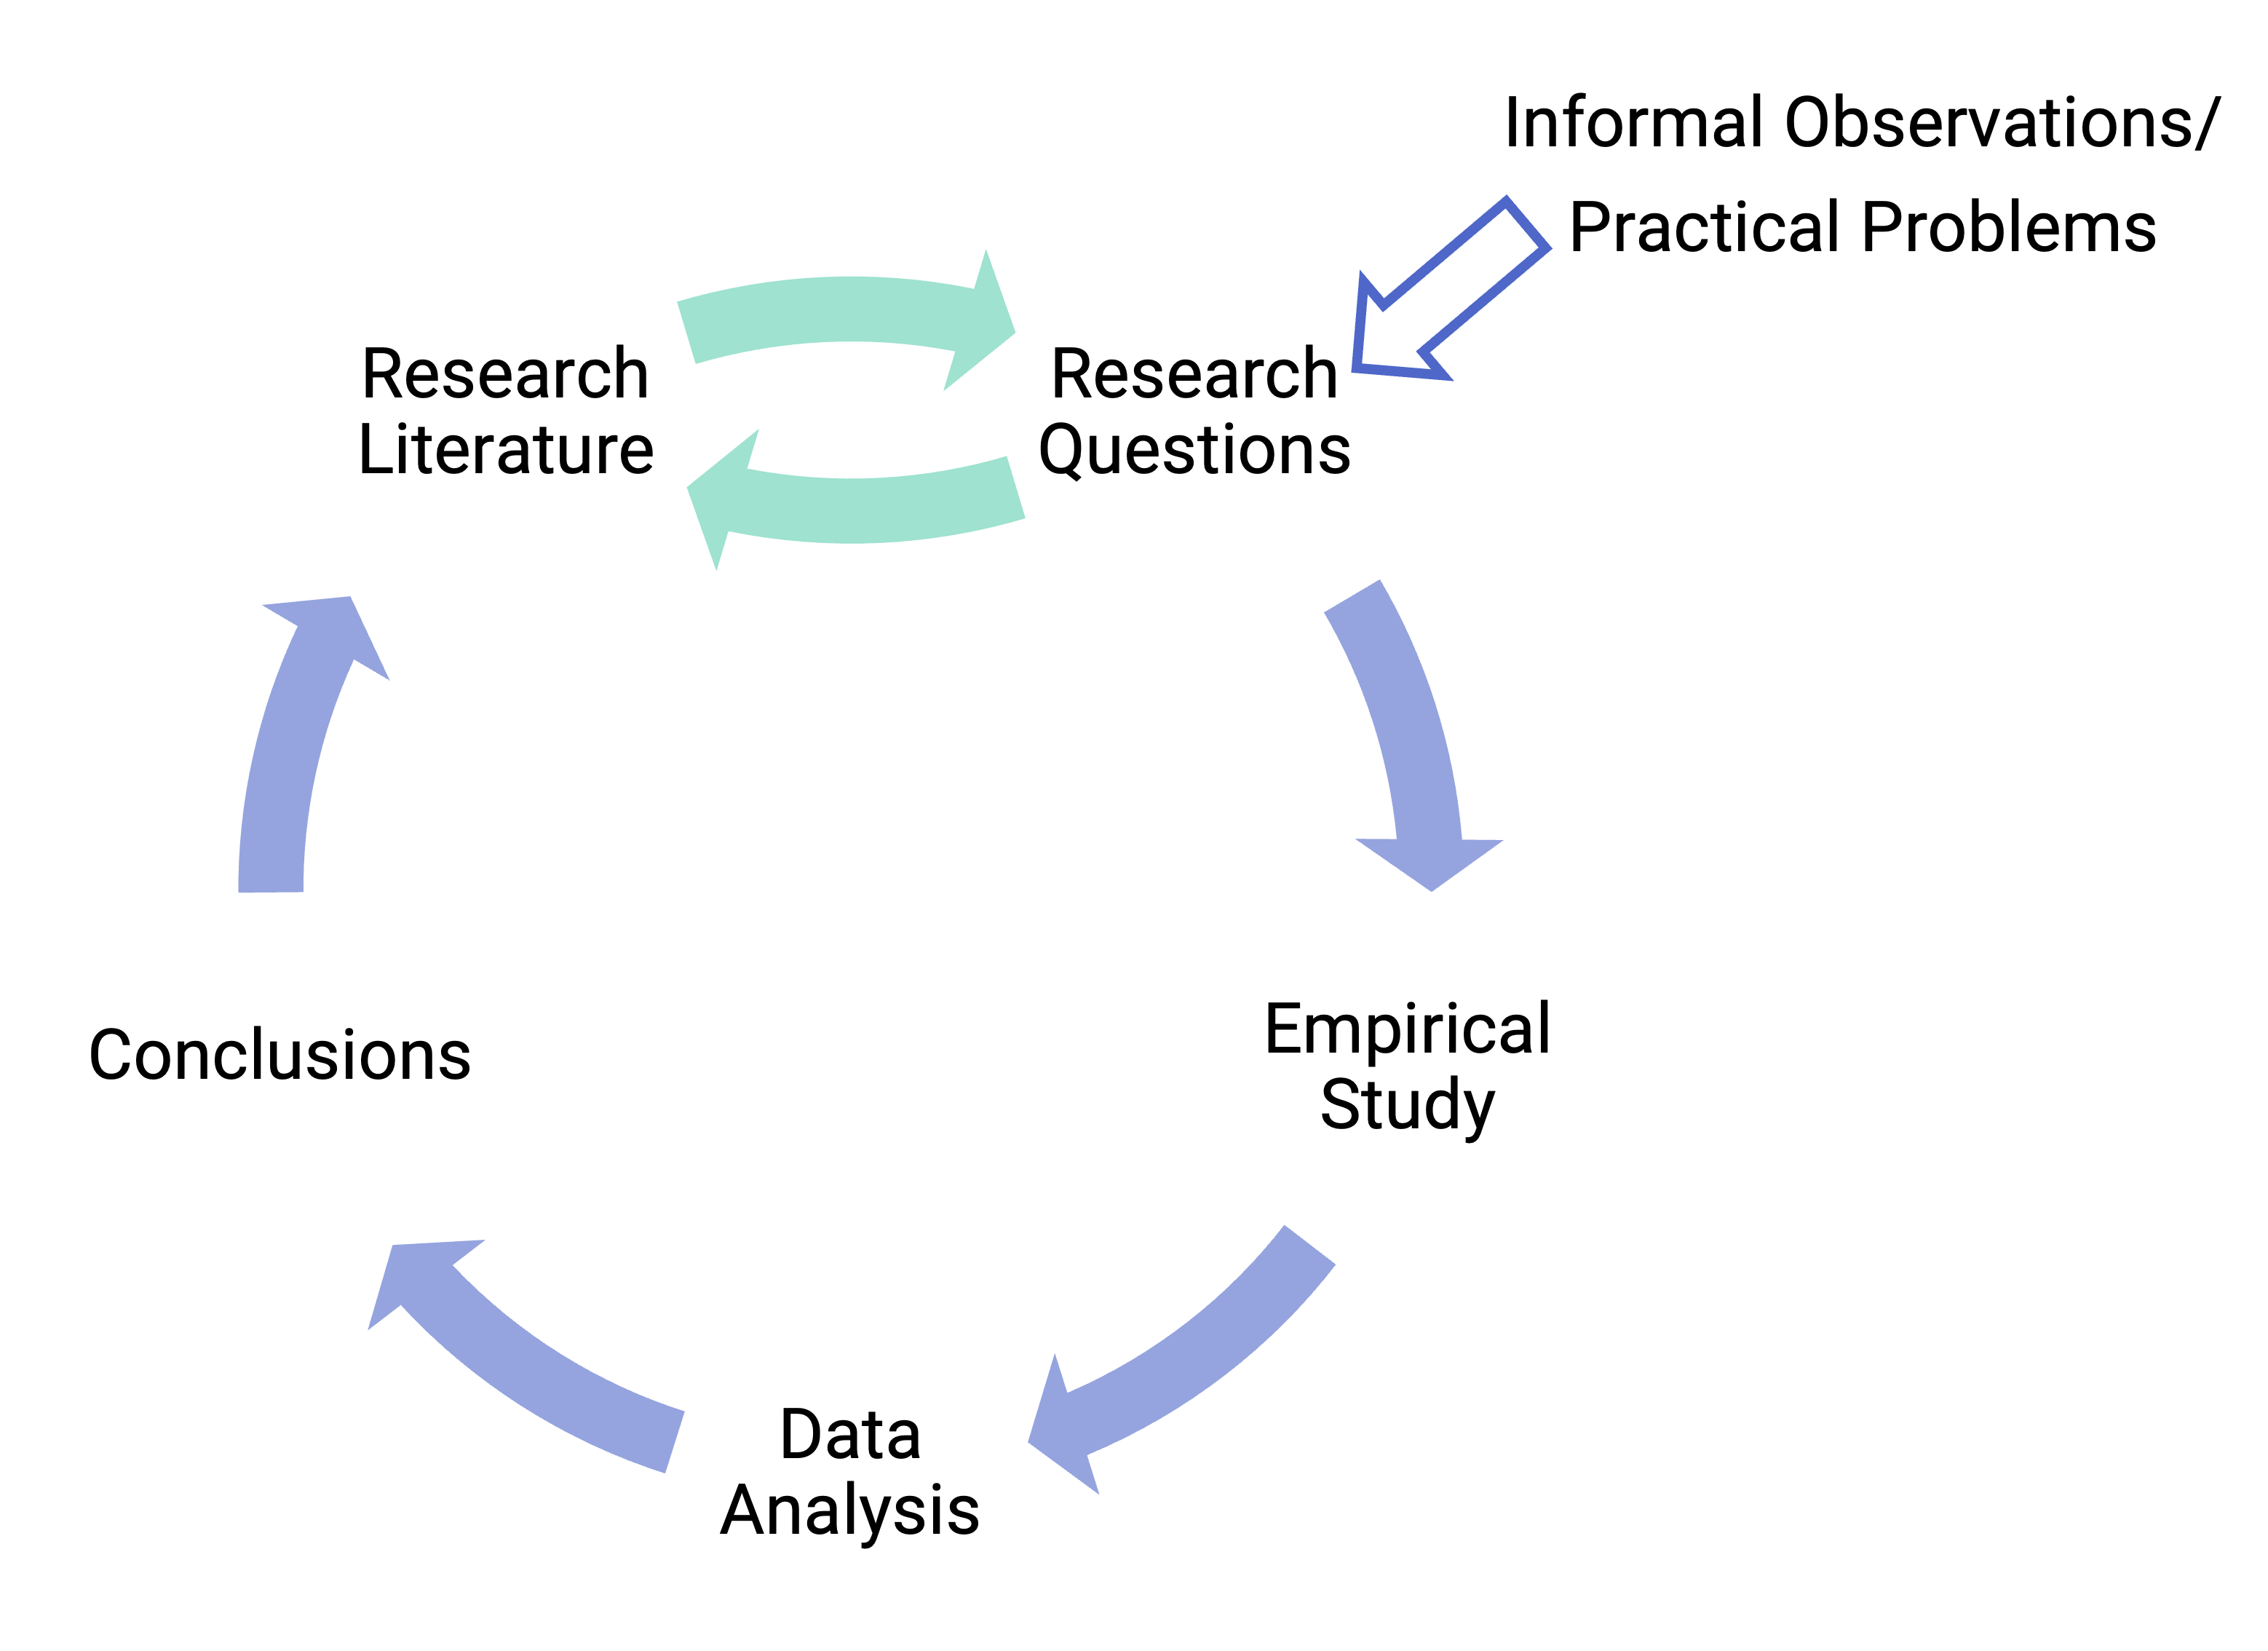 A circular flow chart with arrows going from Research Literature to Research Questions, then to Empirical Study, then to Data Analysis, then to Conclusions, and then back to Research Literature. An additional arrow points from Research Questions to Research Literature. From outside the circle an arrow points to Research Questions from Informal Observations/ Practical Problems.